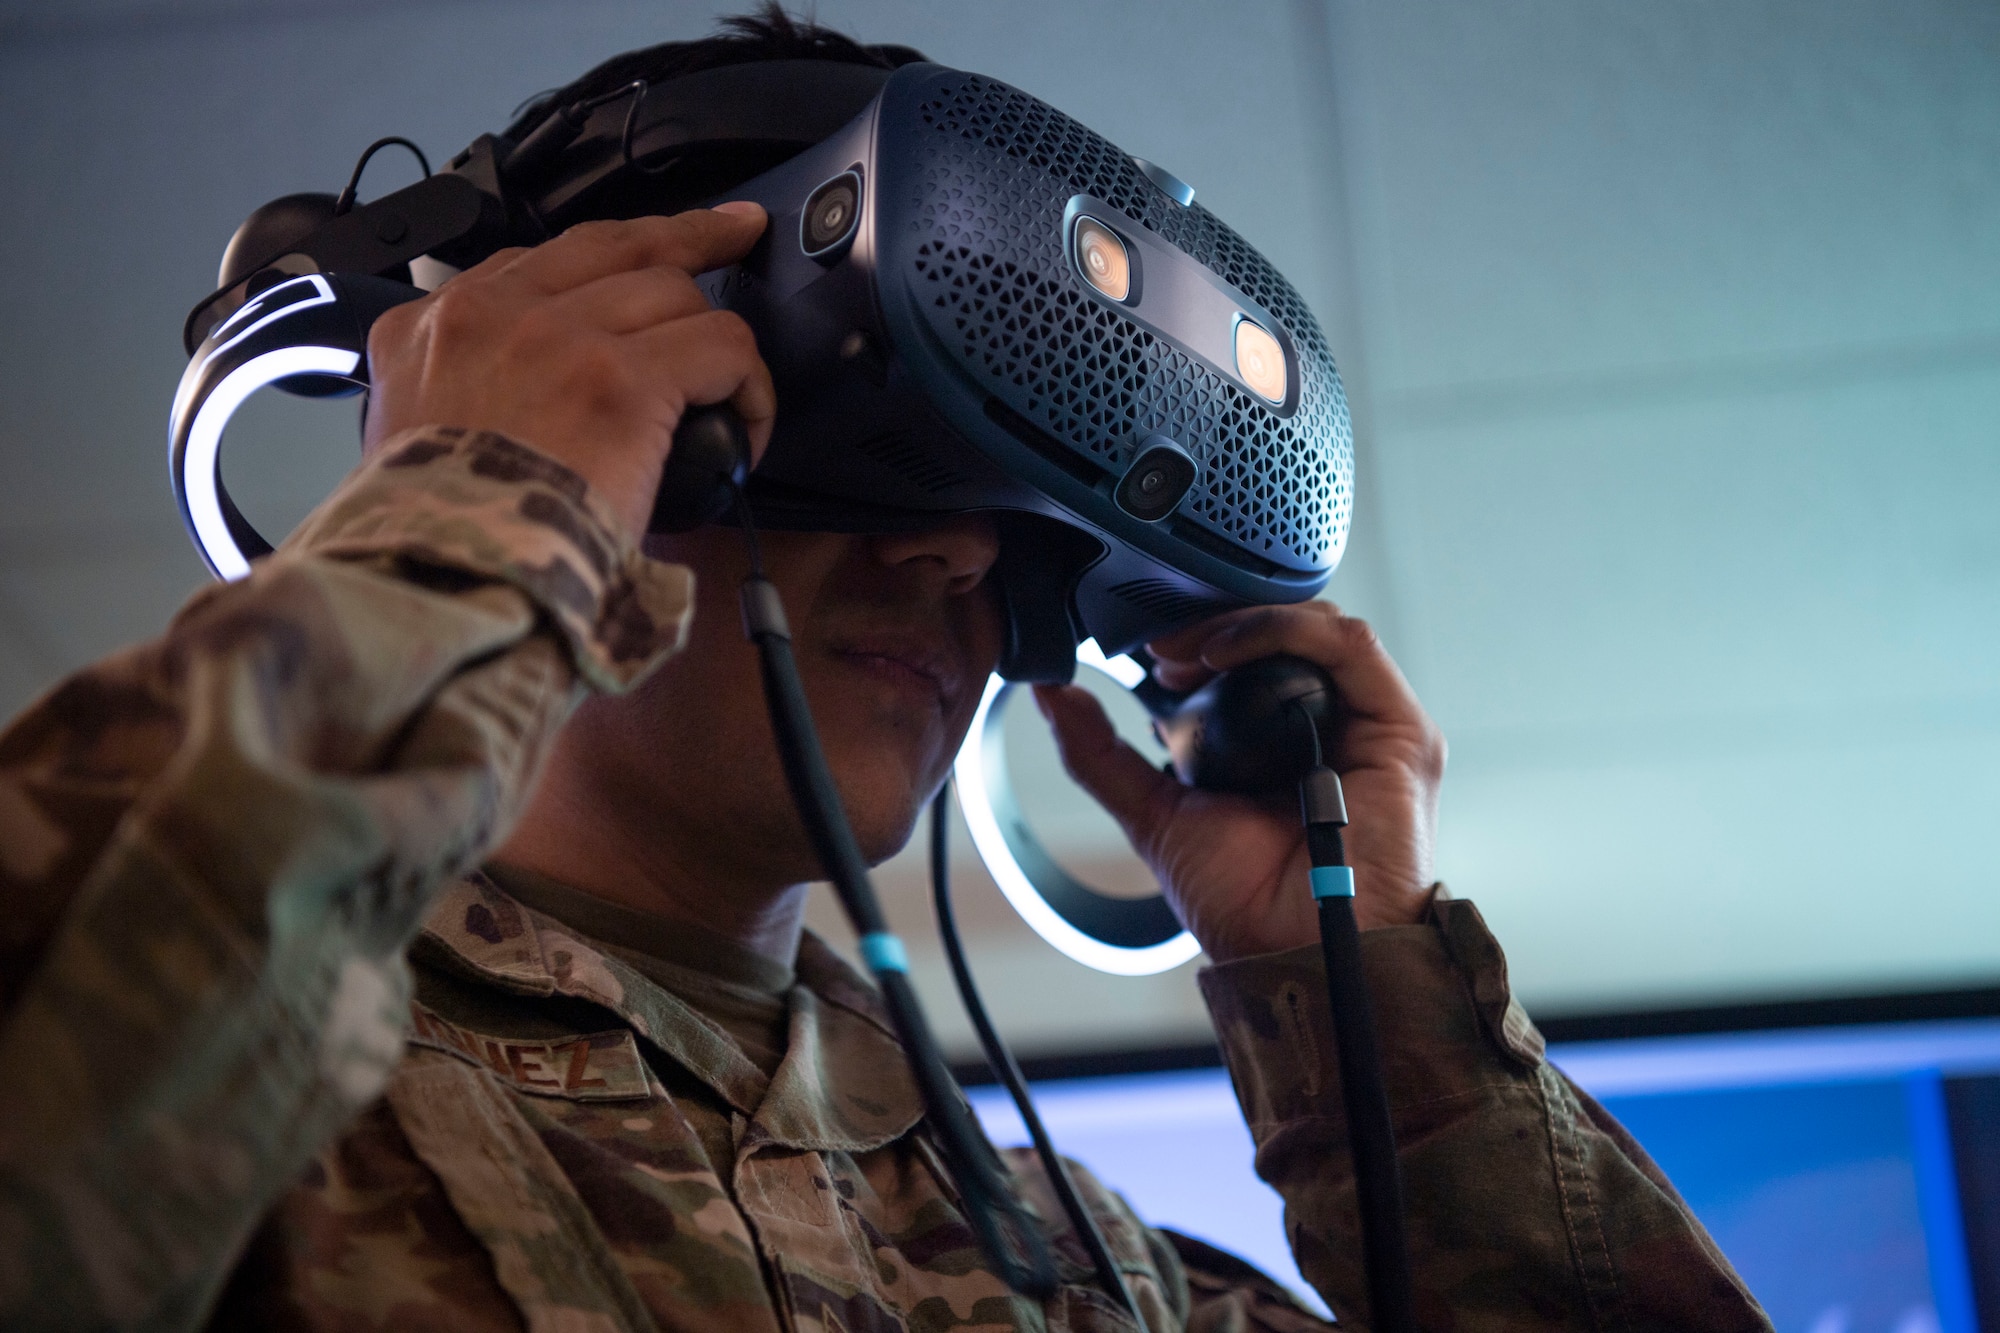 Staff Sgt. Javier Rodriguez, 325th Civil Engineer Squadron geobase technician, tries out the Digital Twin virtual reality goggles, March 10, 2022 at Tyndall Air Force Base, Fla.  (U.S. Air Force photo by Staff Sgt. Janiqua P. Robinson)